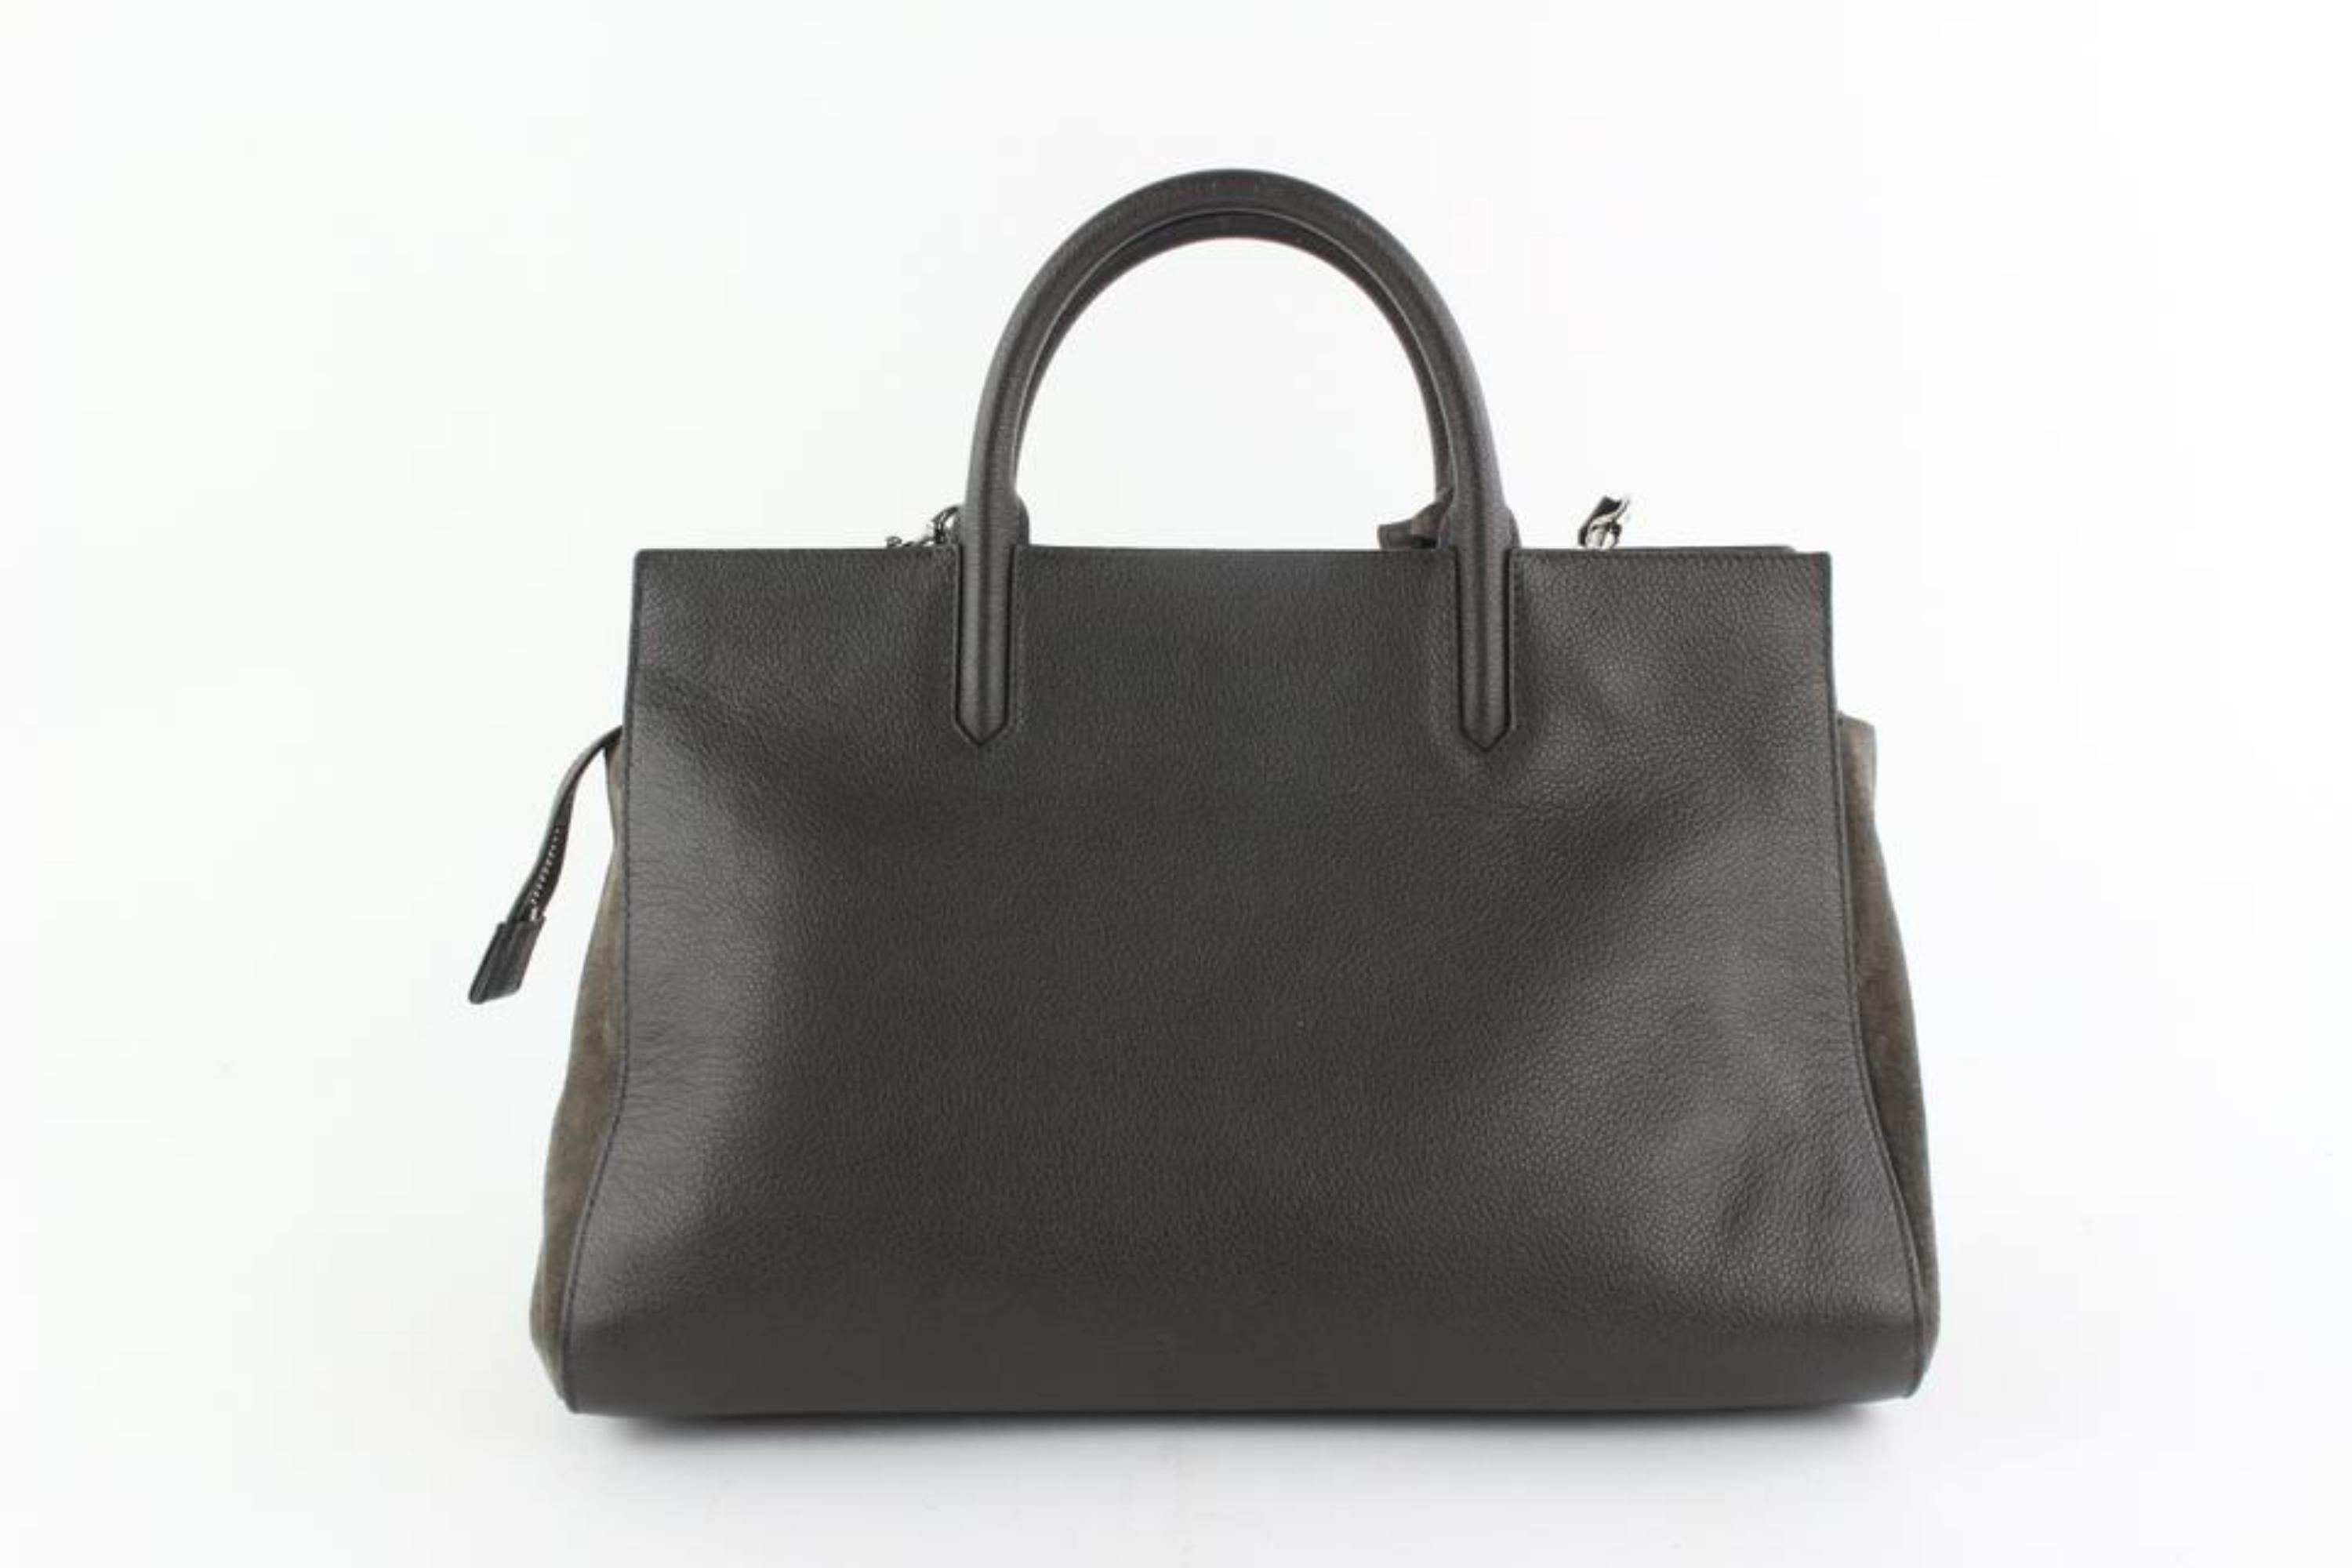 Saint Laurent Cabas Rive Gauche Anthracite Small 2way 16mz1019 Grey Leather Tote For Sale 6